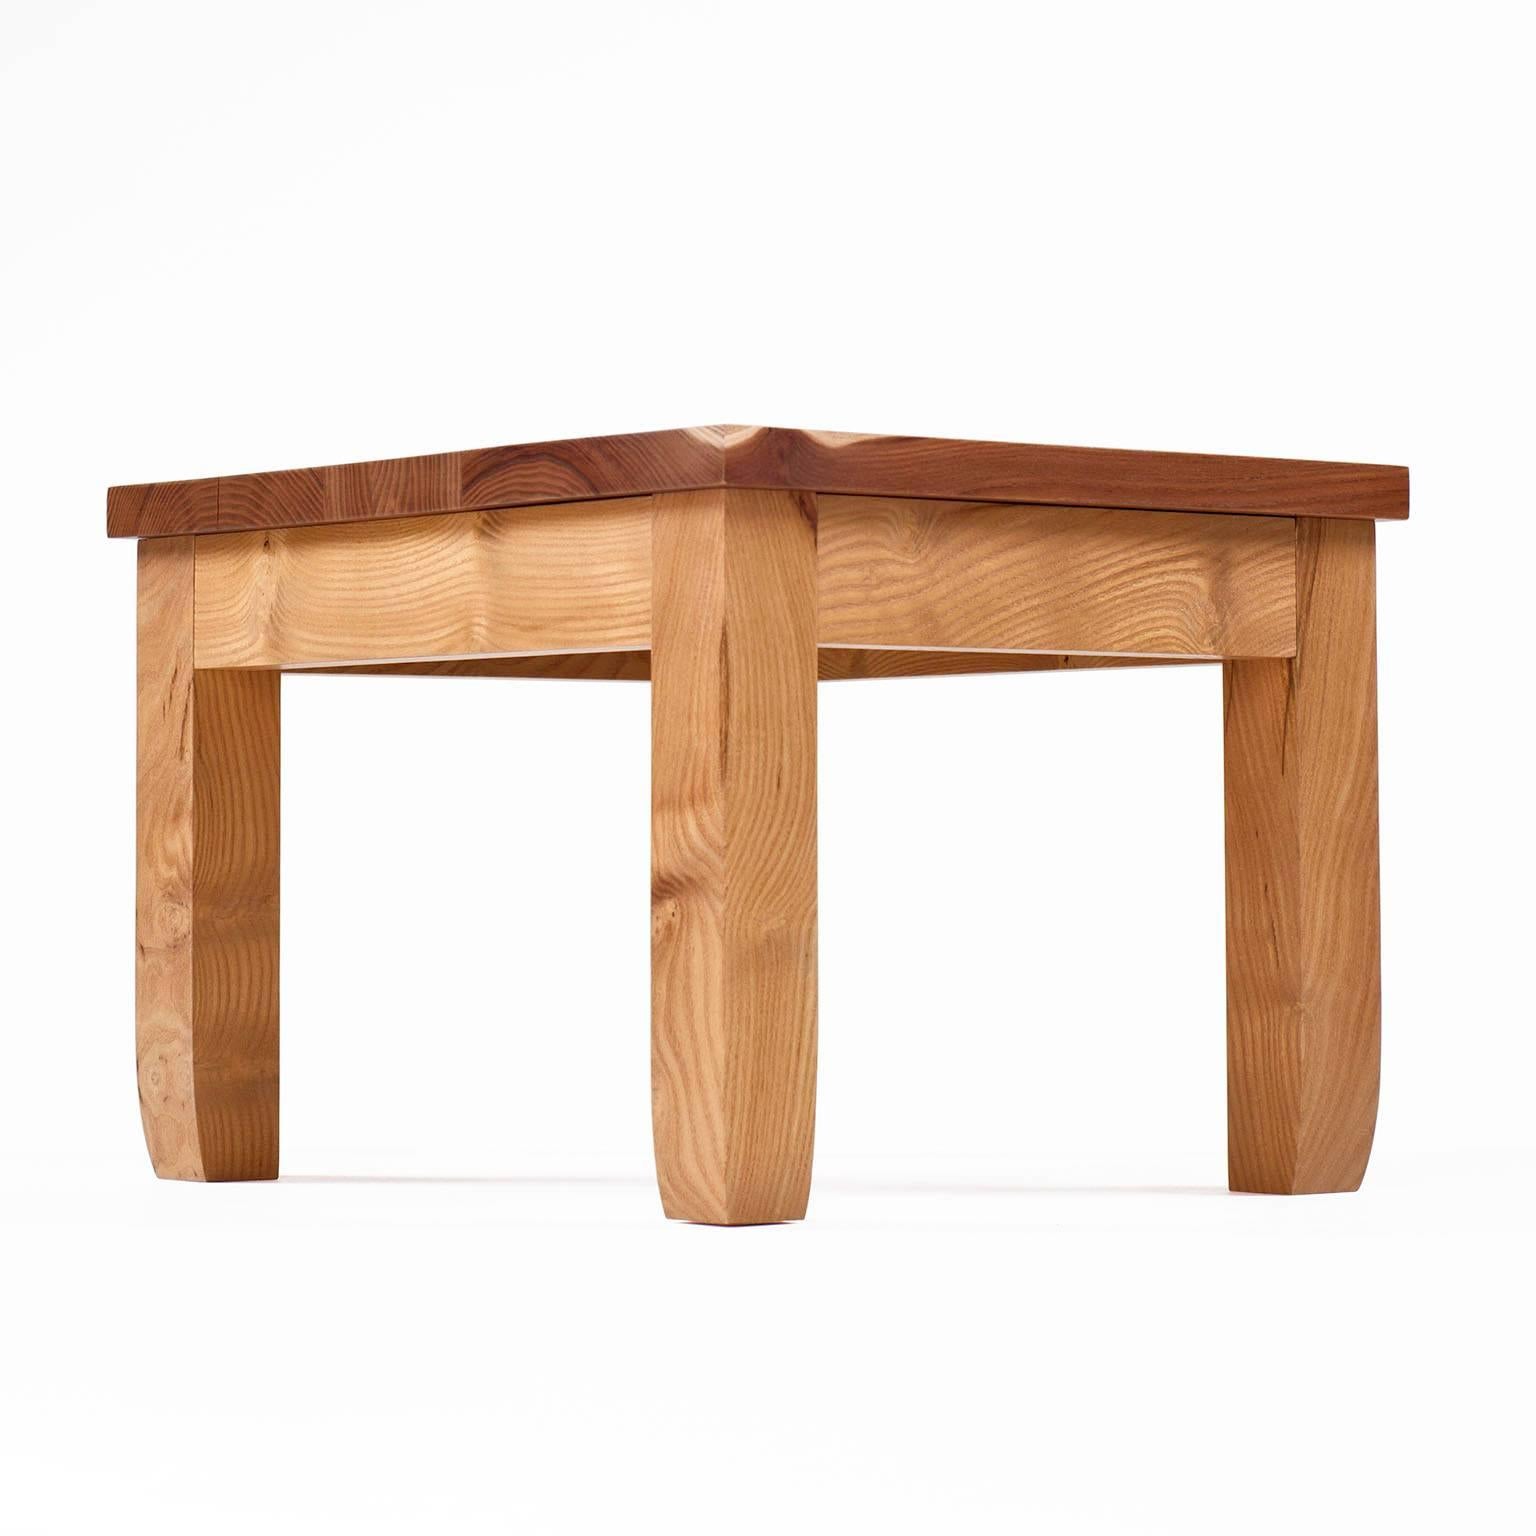 Prayer stool 05
mulberry
48 40 33H ( 18.875 x 15.875 x 13H" ) 
water-base clear-coat protective finish
2016

One step up towards reaching your inner goals or your upper shelves. The perfect front hall shoe bench, plant stand, luggage rack.